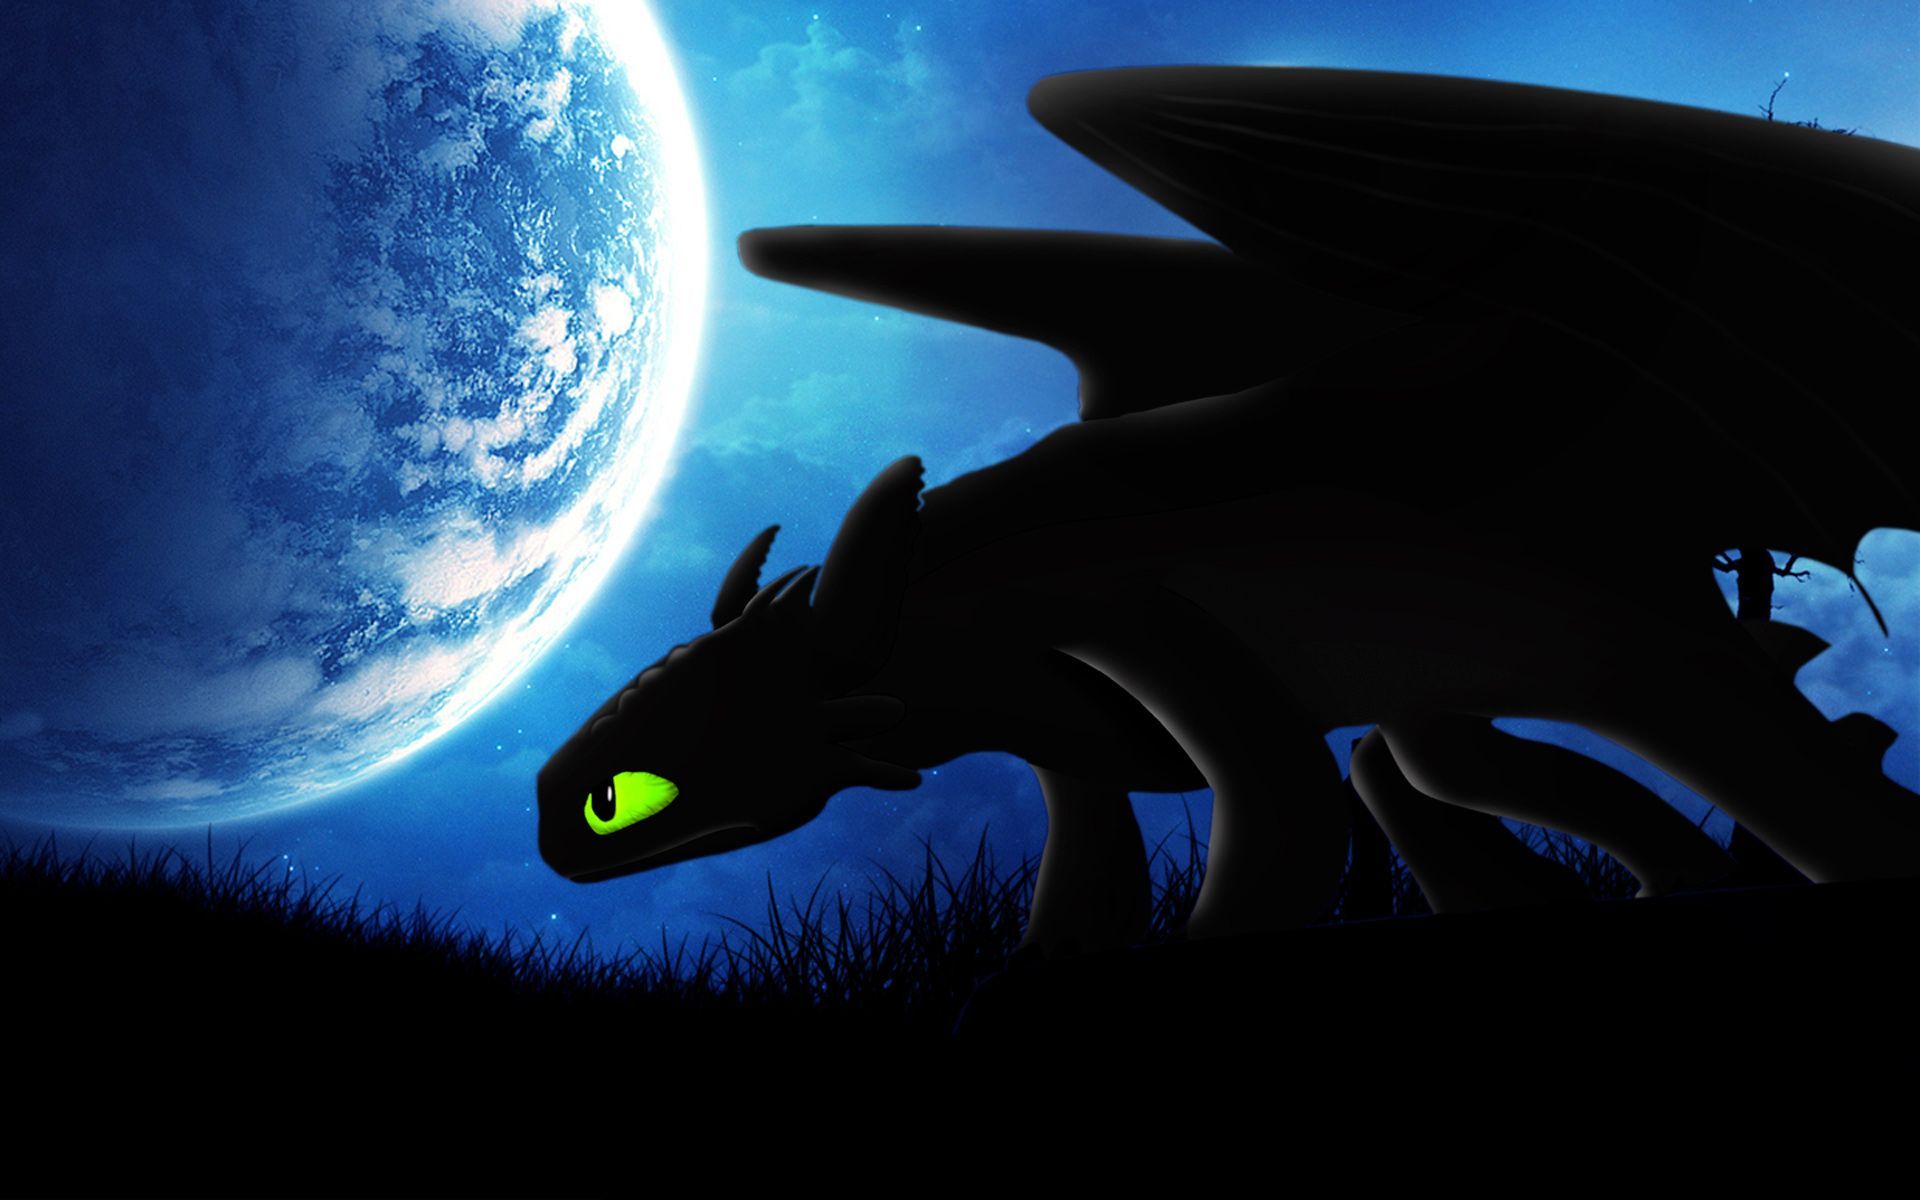 How to Train Your Dragon 2 Pictures, Wallpapers and Desktop ...